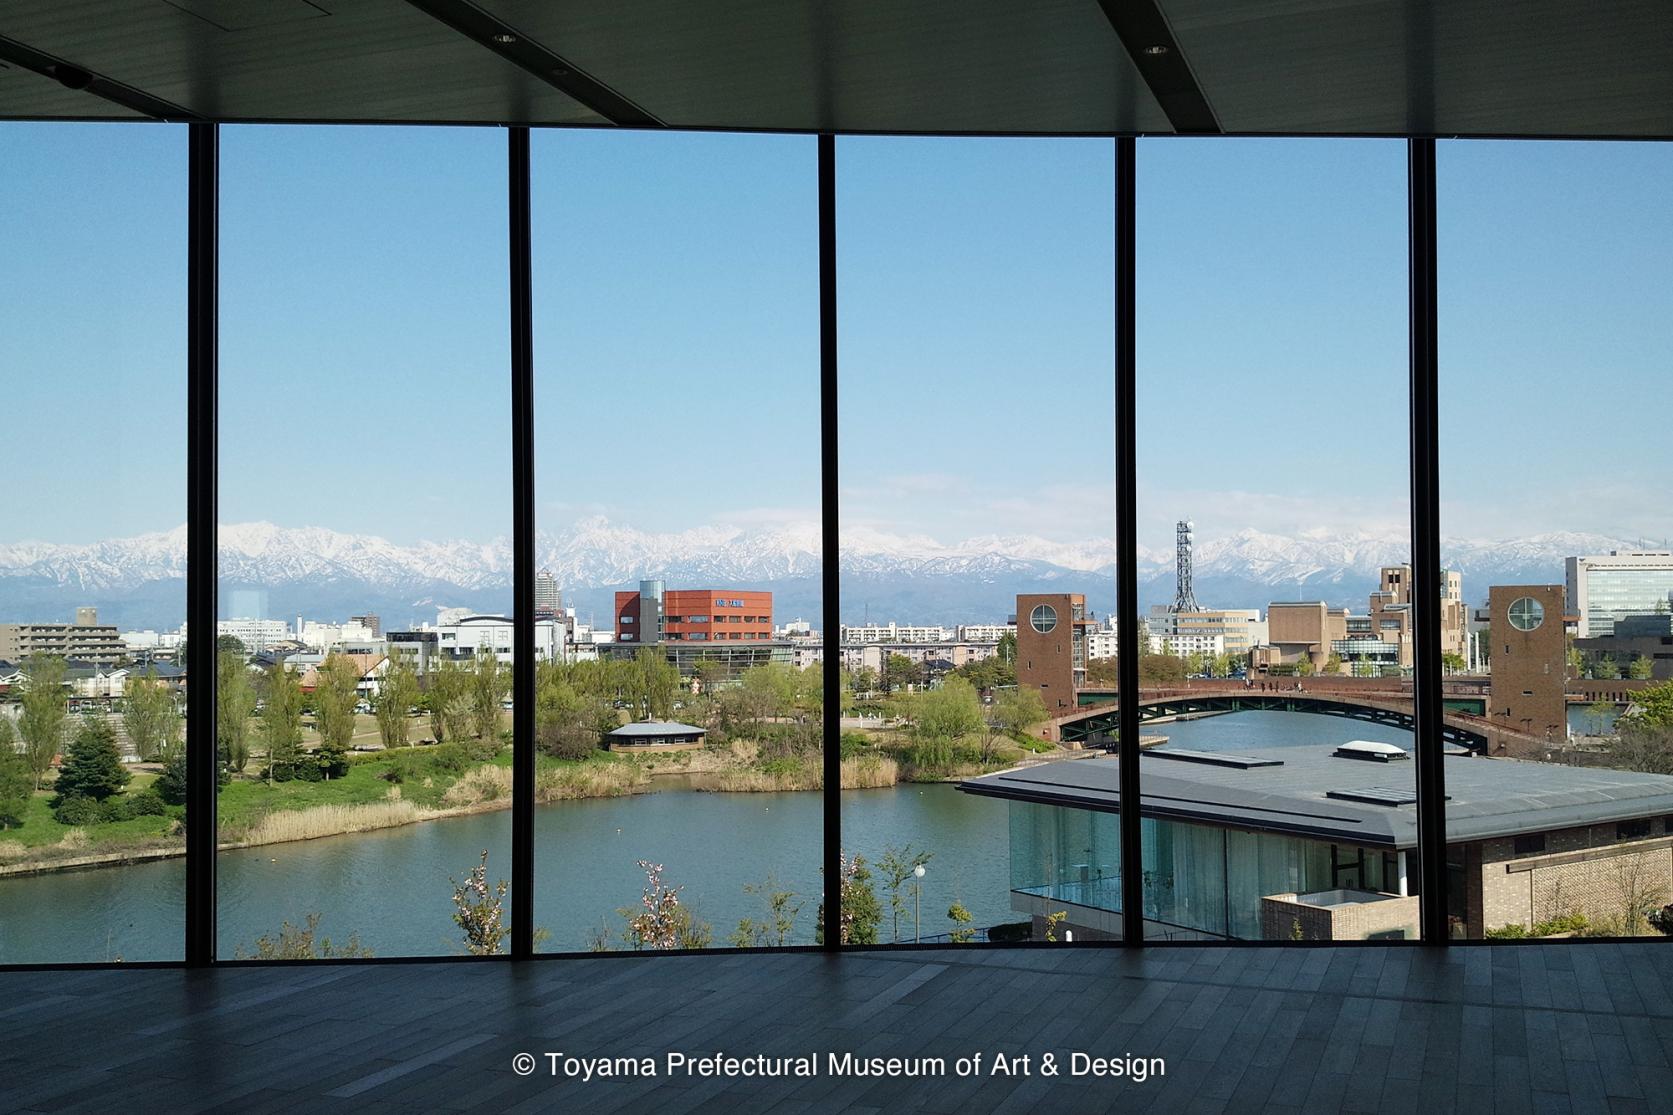 Toyama Prefectural Museum of Art and Design: A world-class museum with rooftop installations-4